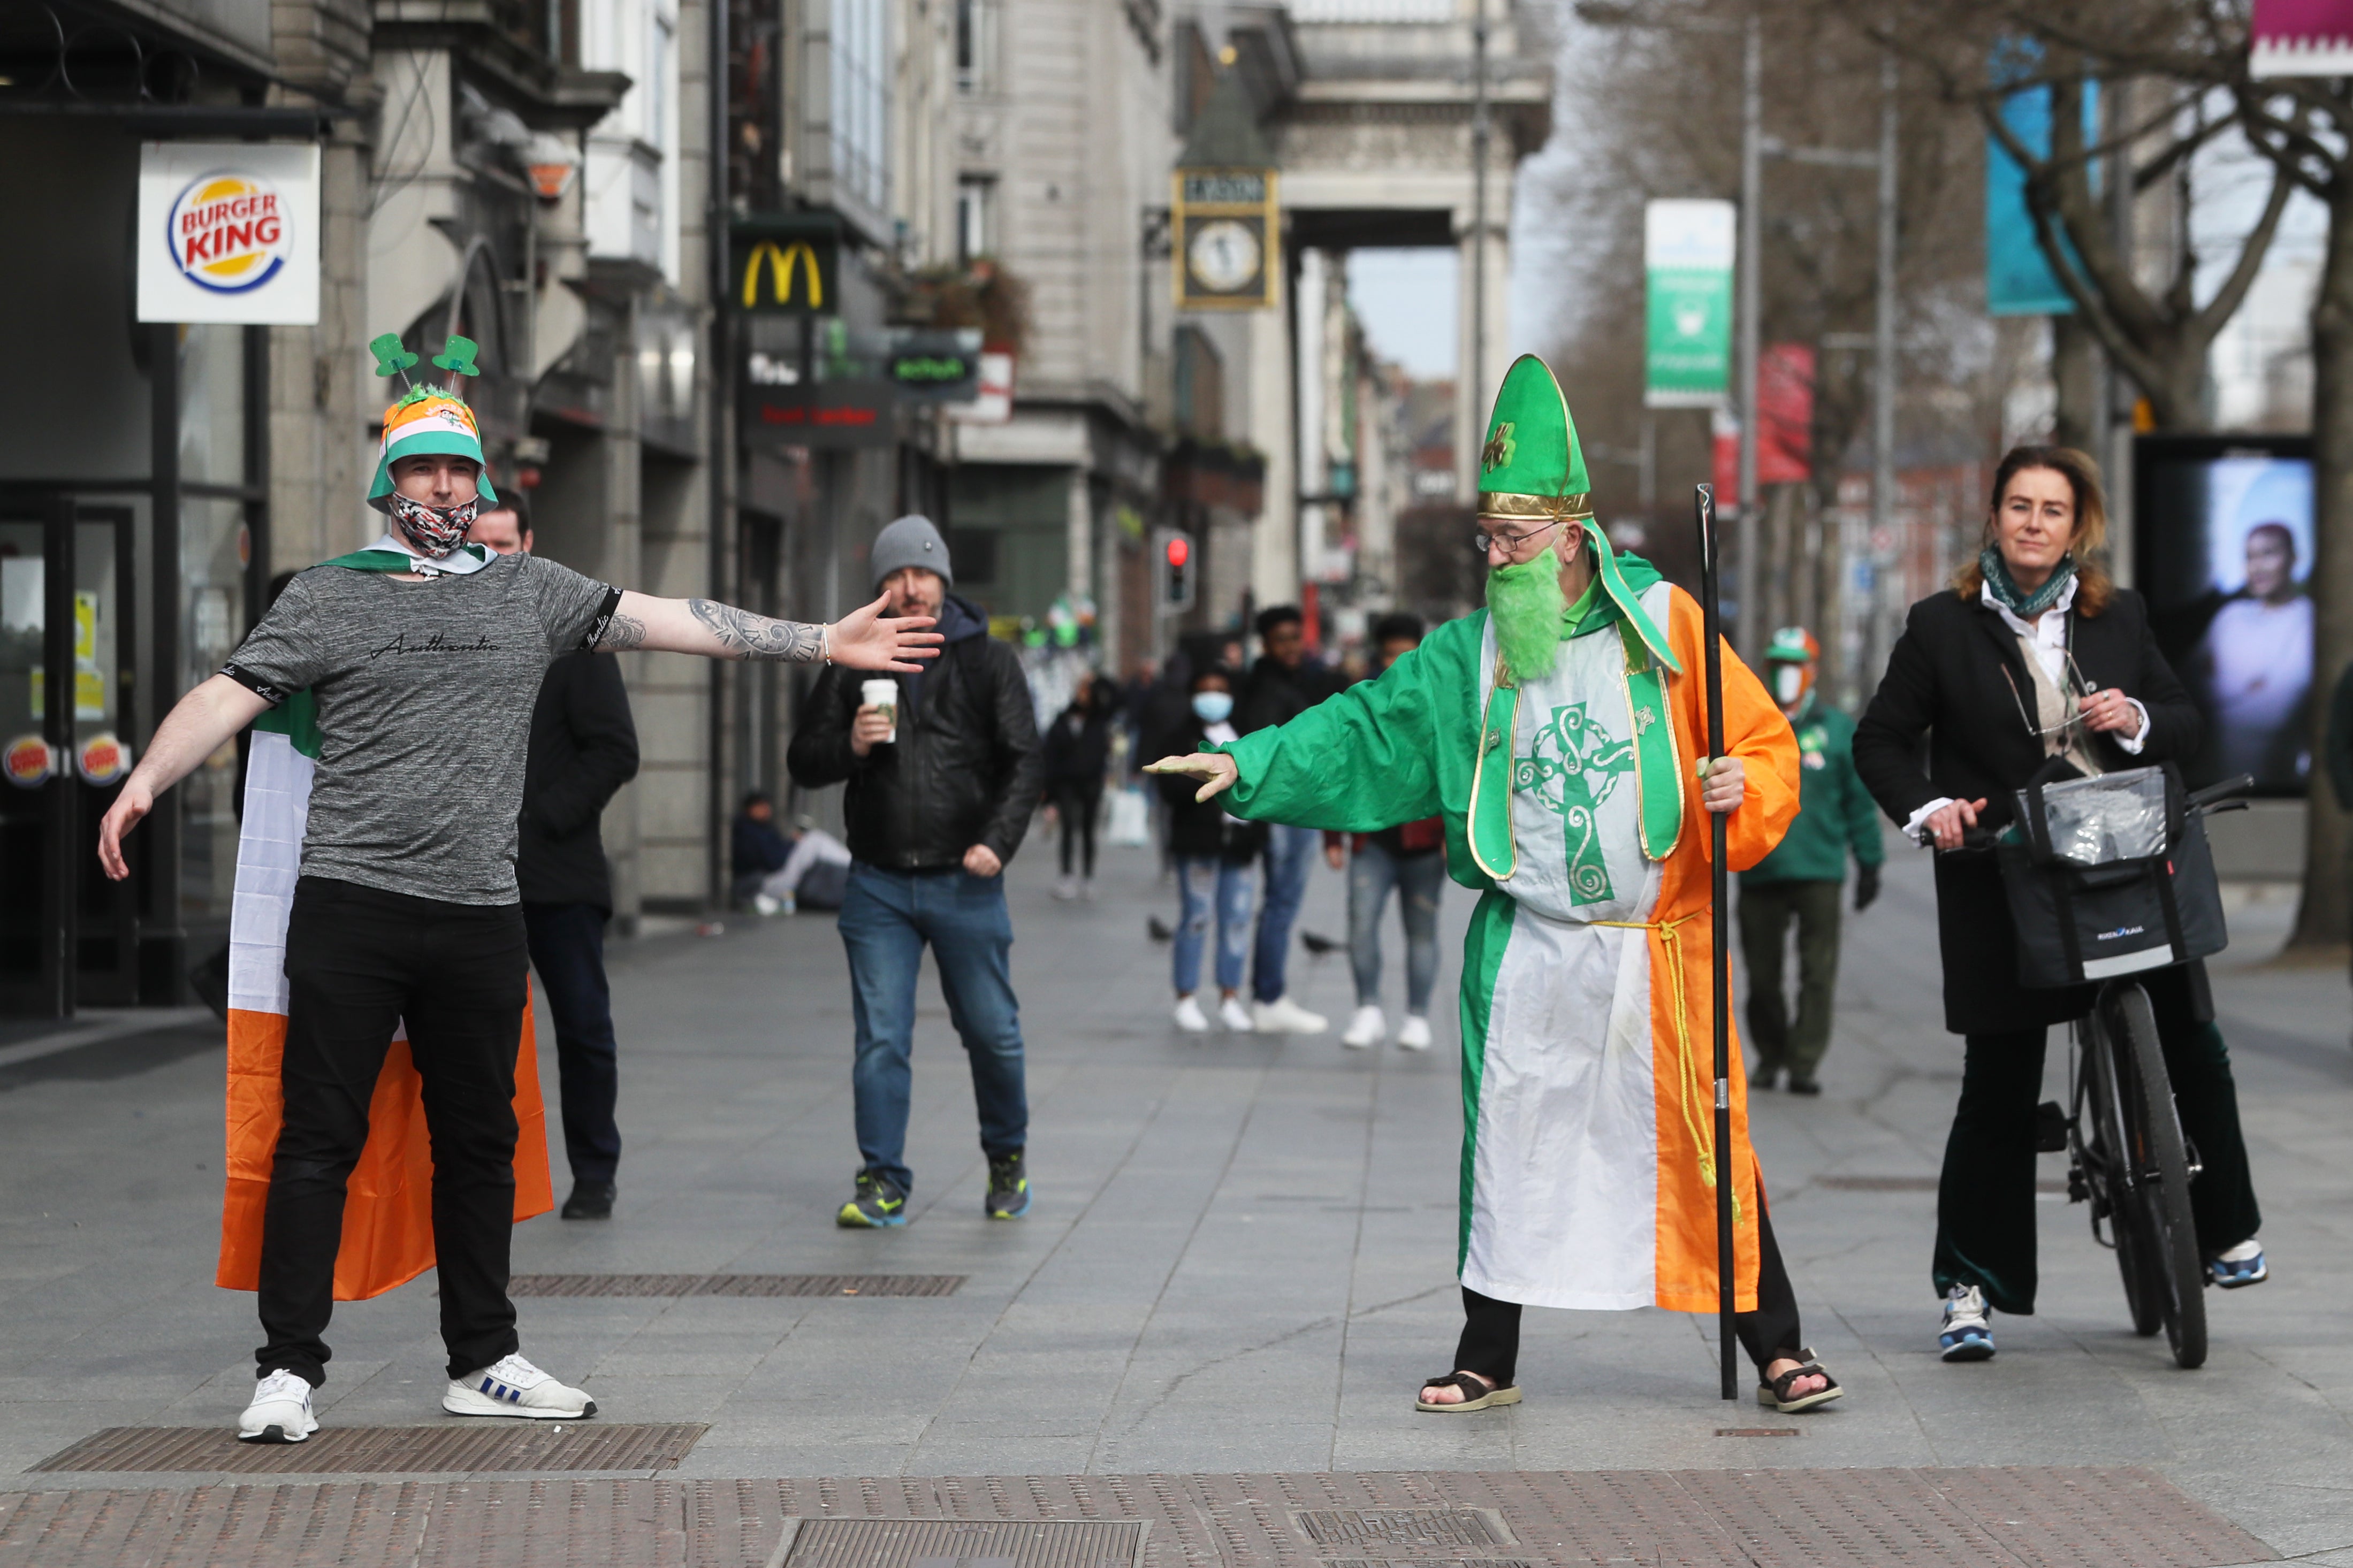 People celebrate St Patrick’s Day on O’Connell Street in Dublin (Brian Lawless/PA)